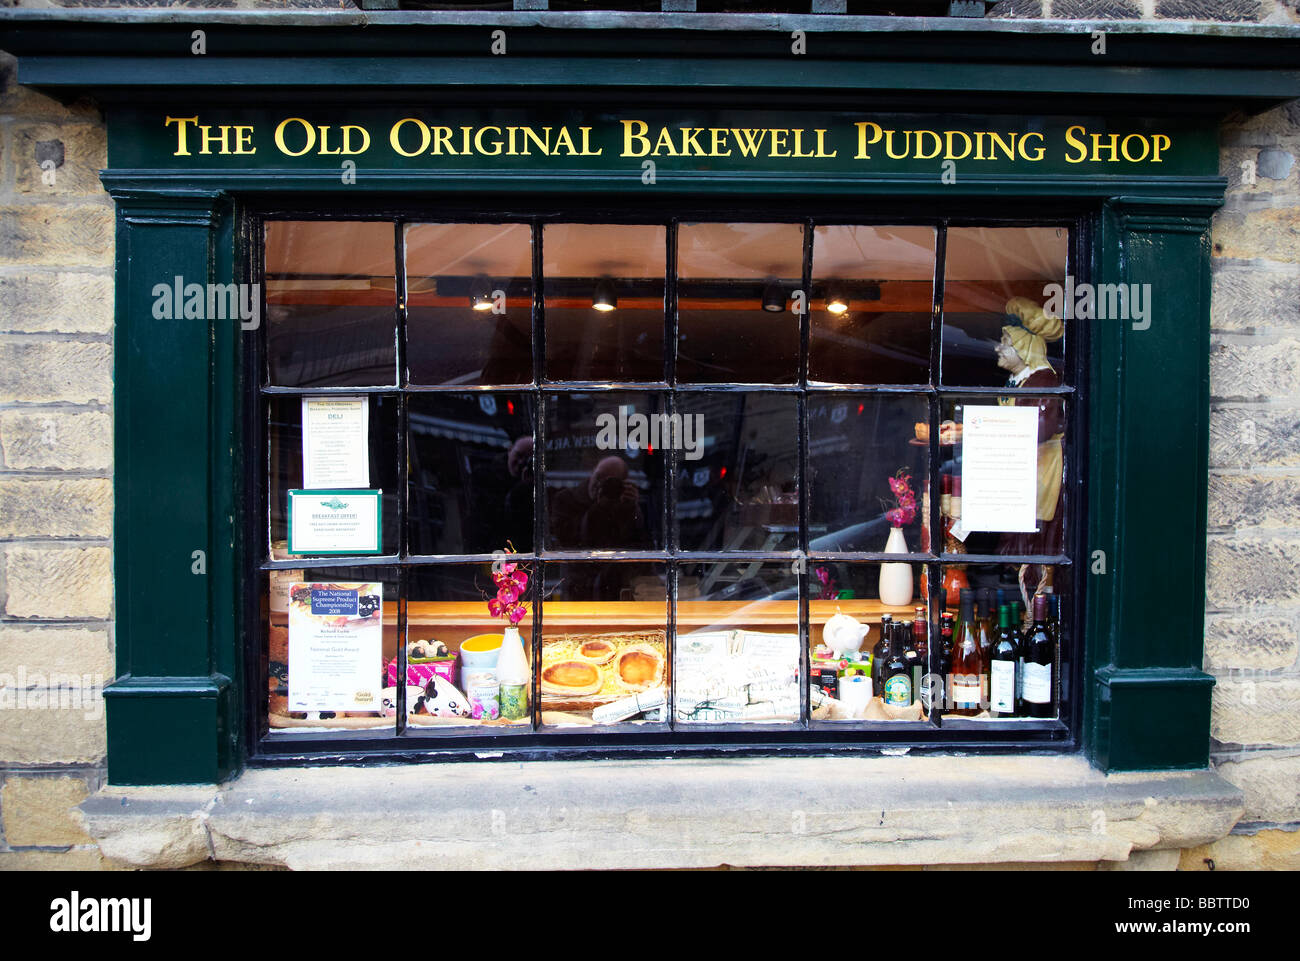 Bakewell pudding shop, pudding shop front Stock Photo